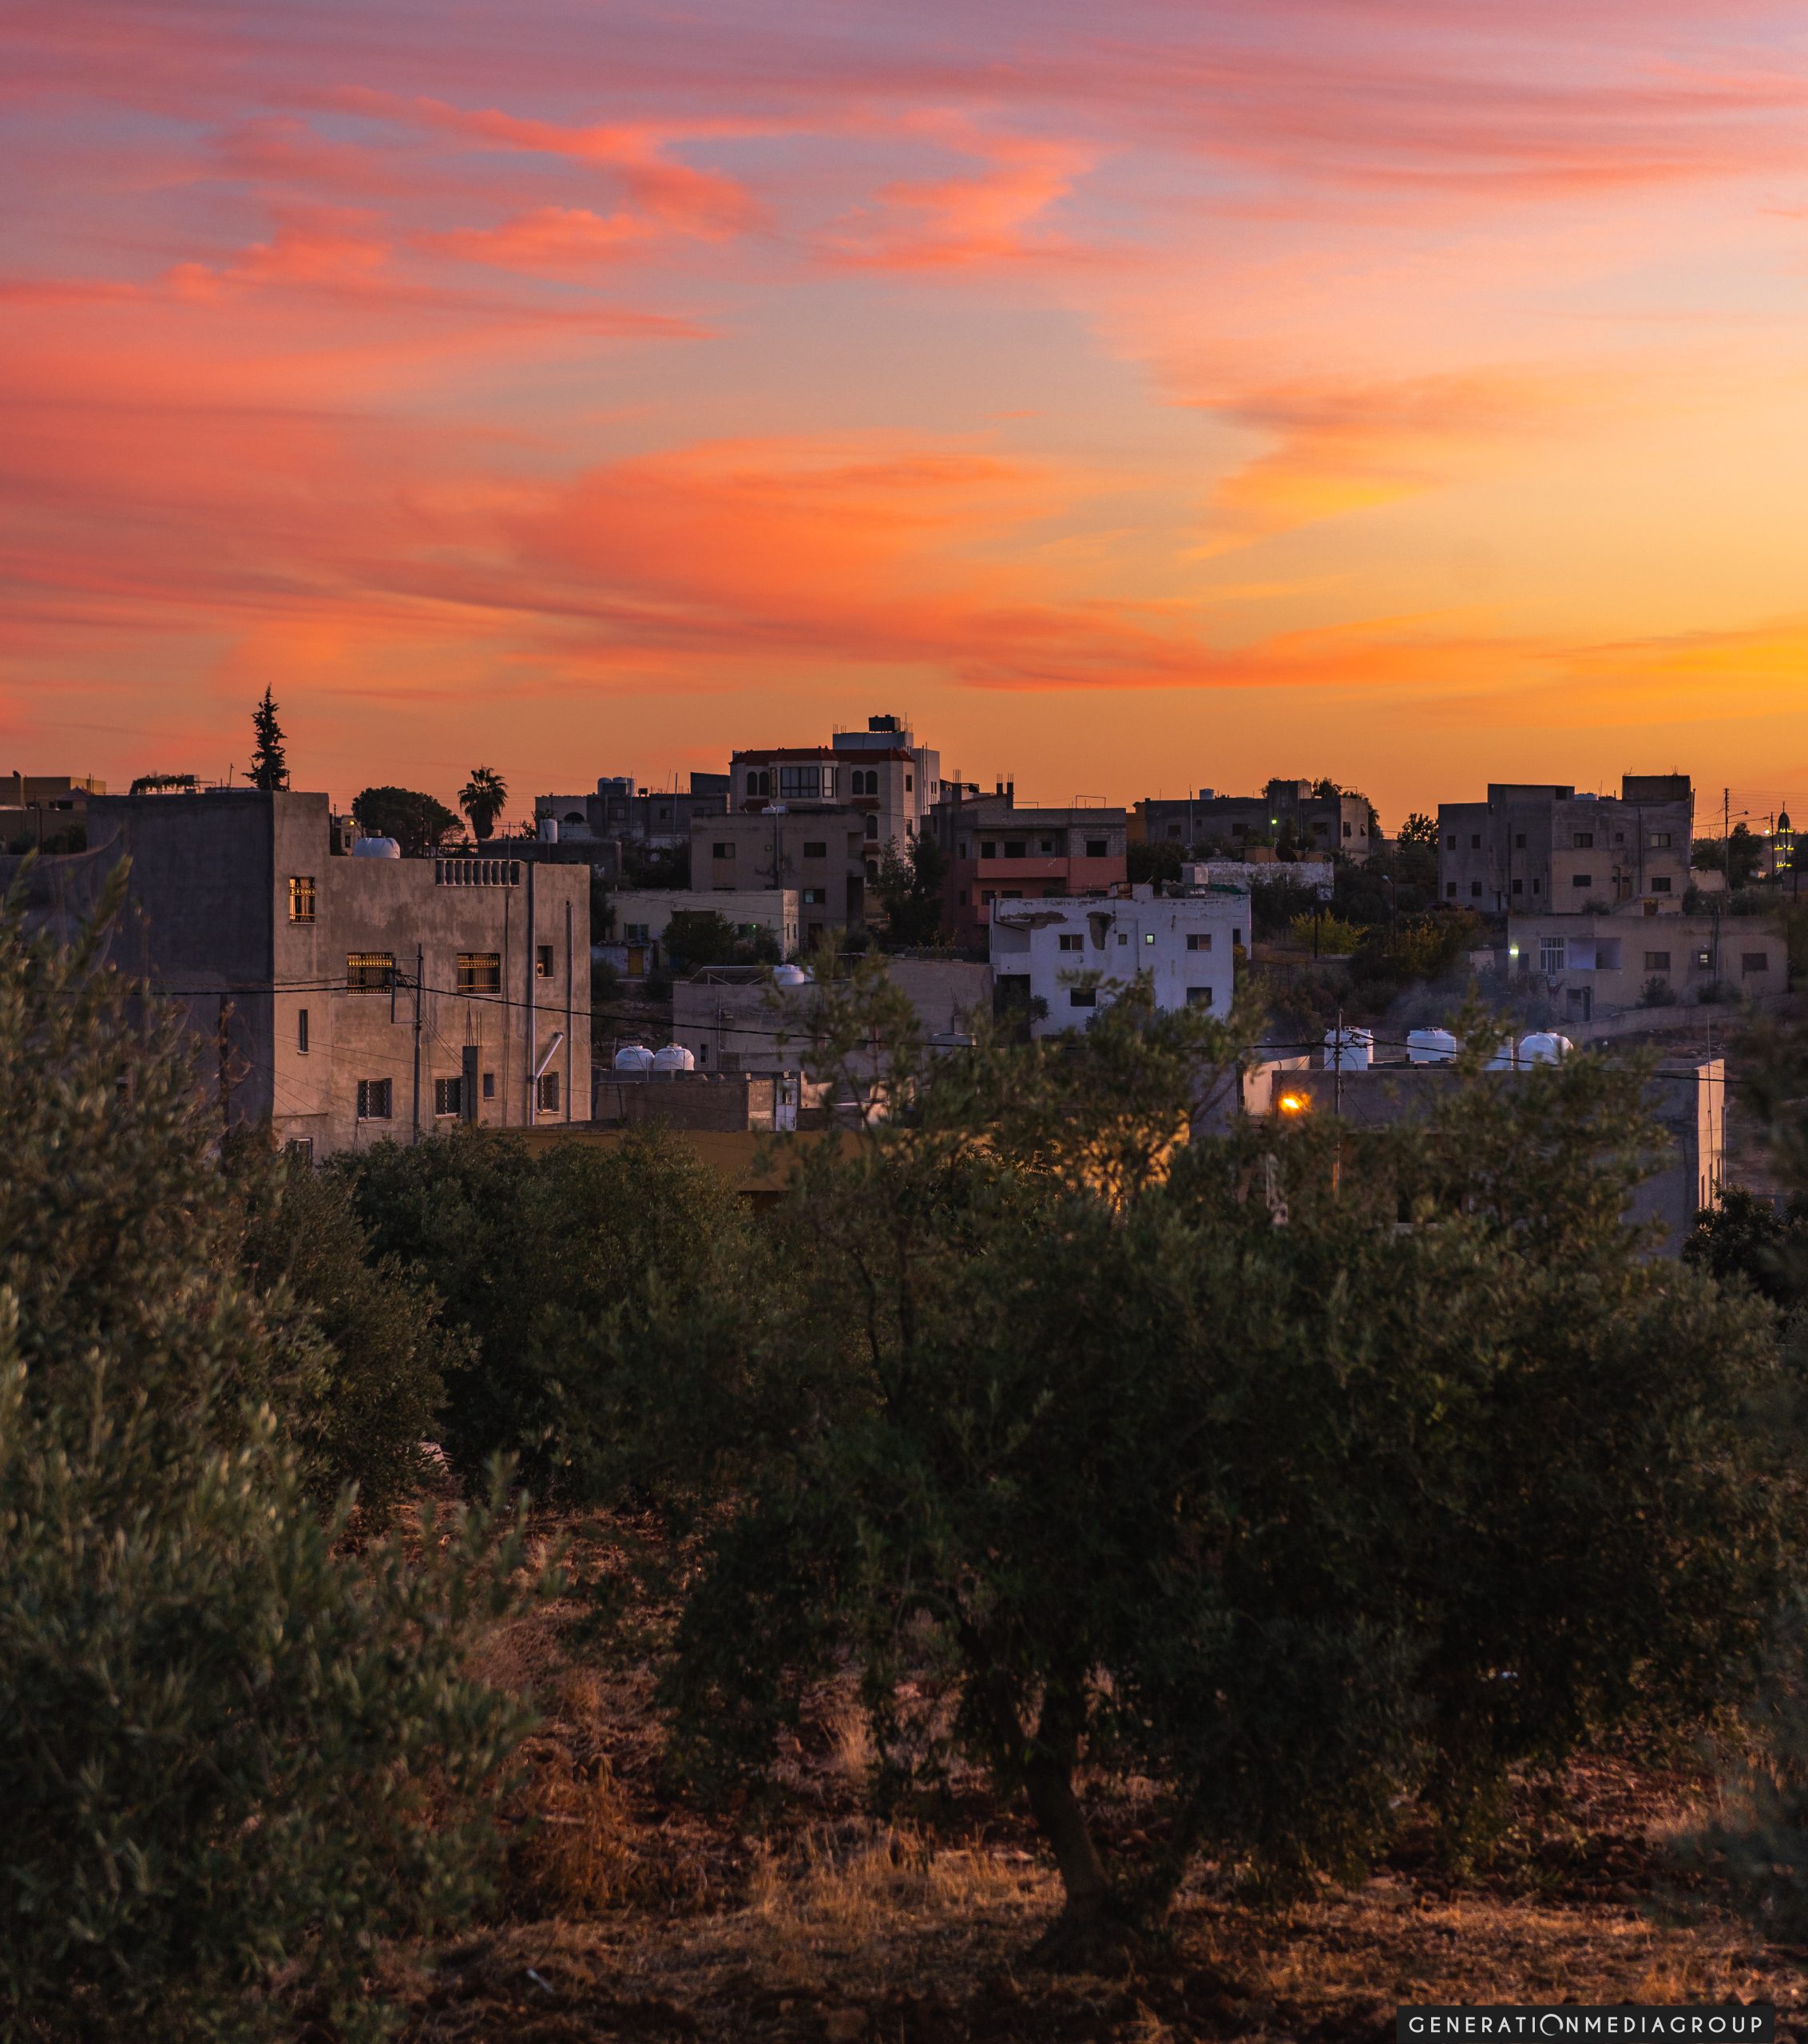 Landscape travel photograph of a small town in the middle east with a orange sunset